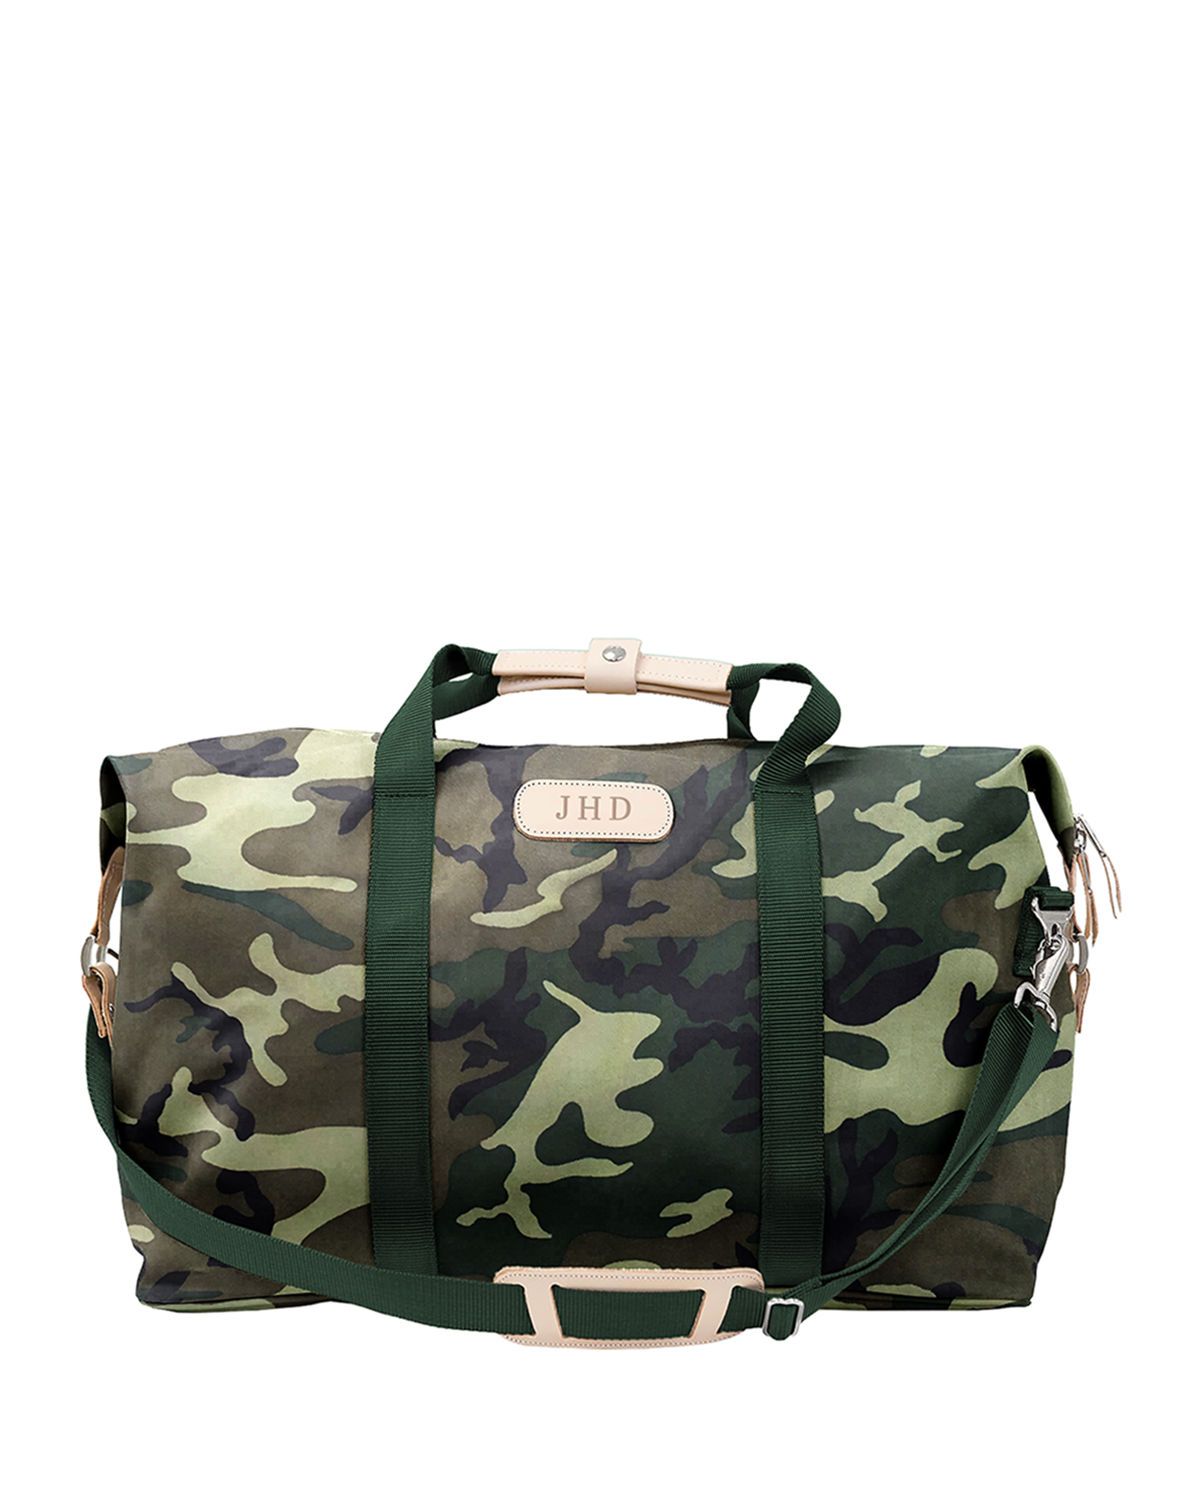 High Fashion 21 in Print Duffle Personalized Cool Camo